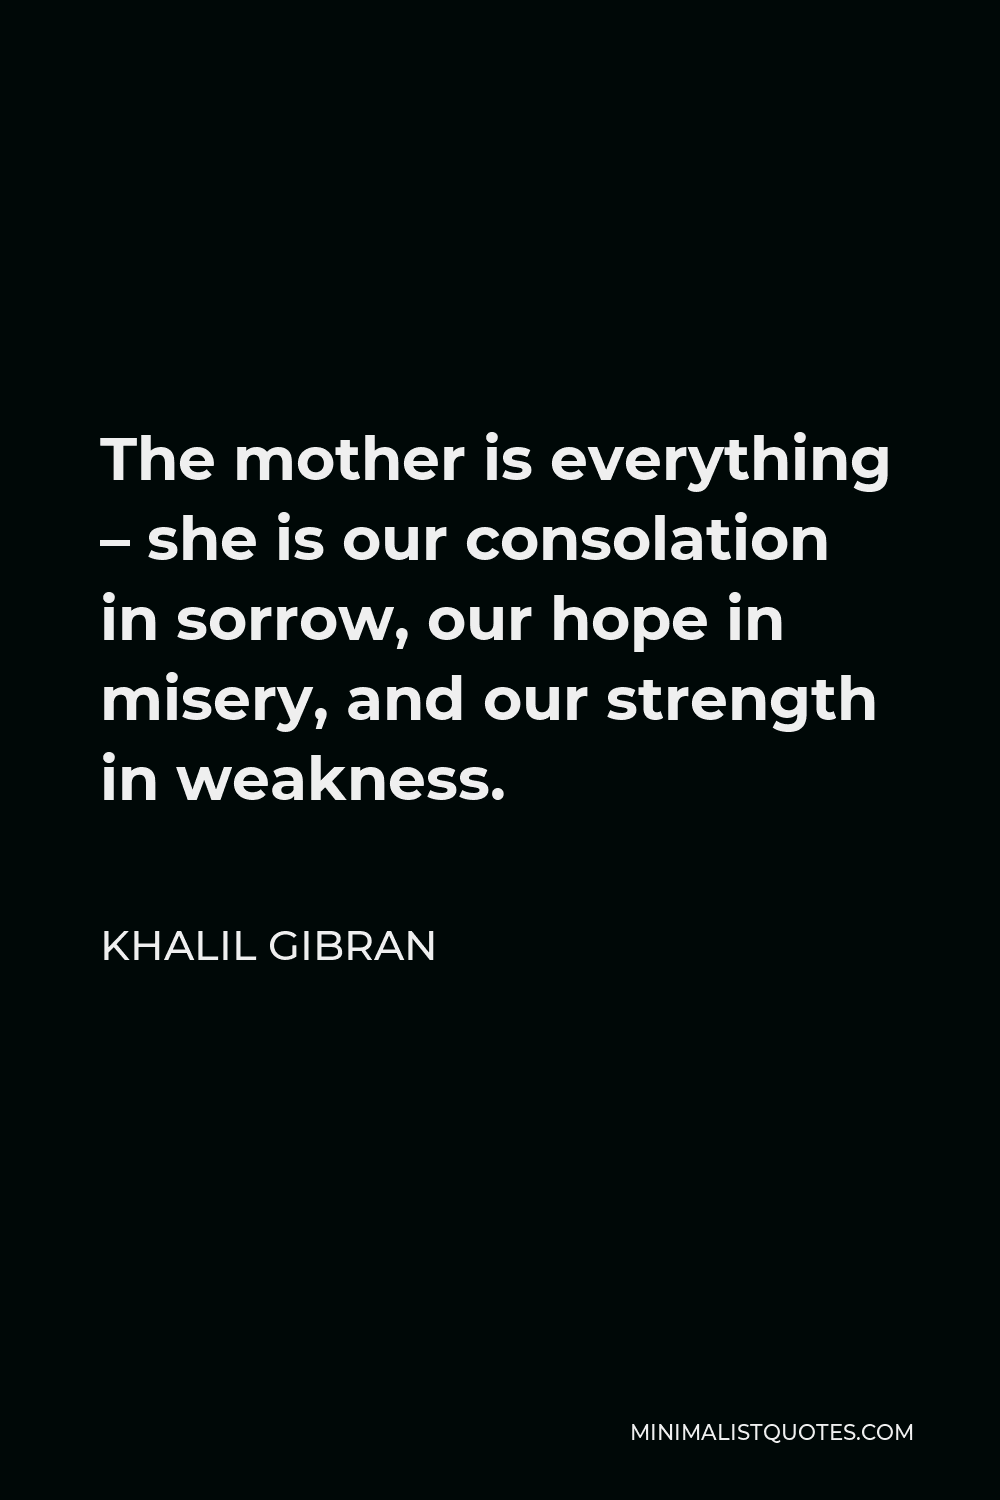 Khalil Gibran Quote - The mother is everything – she is our consolation in sorrow, our hope in misery, and our strength in weakness.